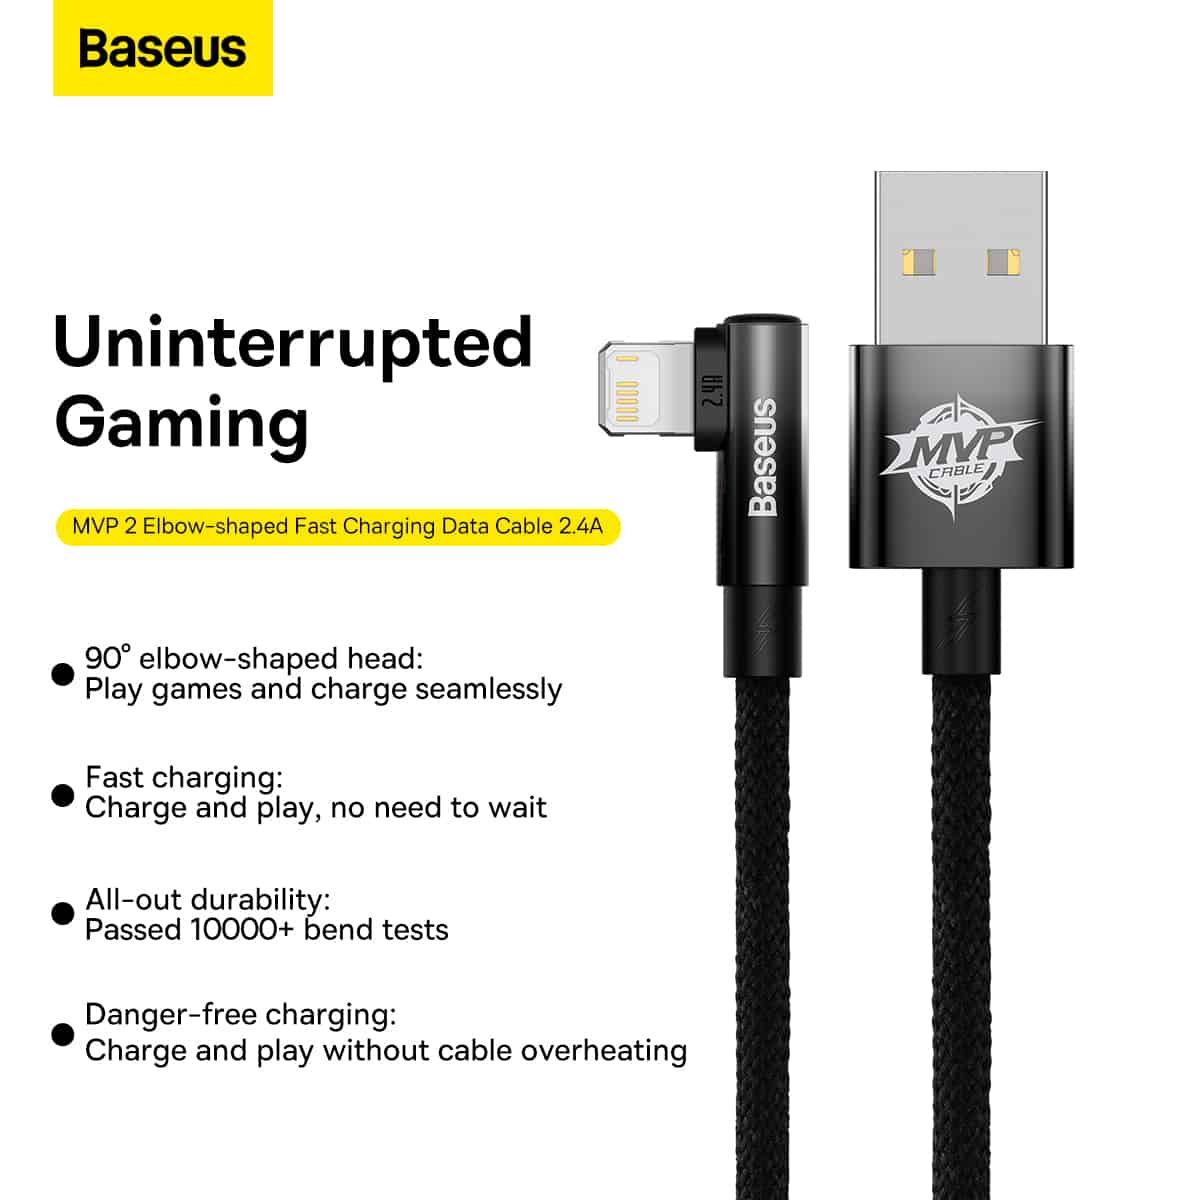 Baseus MVP 2 Elbow shaped Fast Charging Data Cable USB to iPhone 2.4A 3